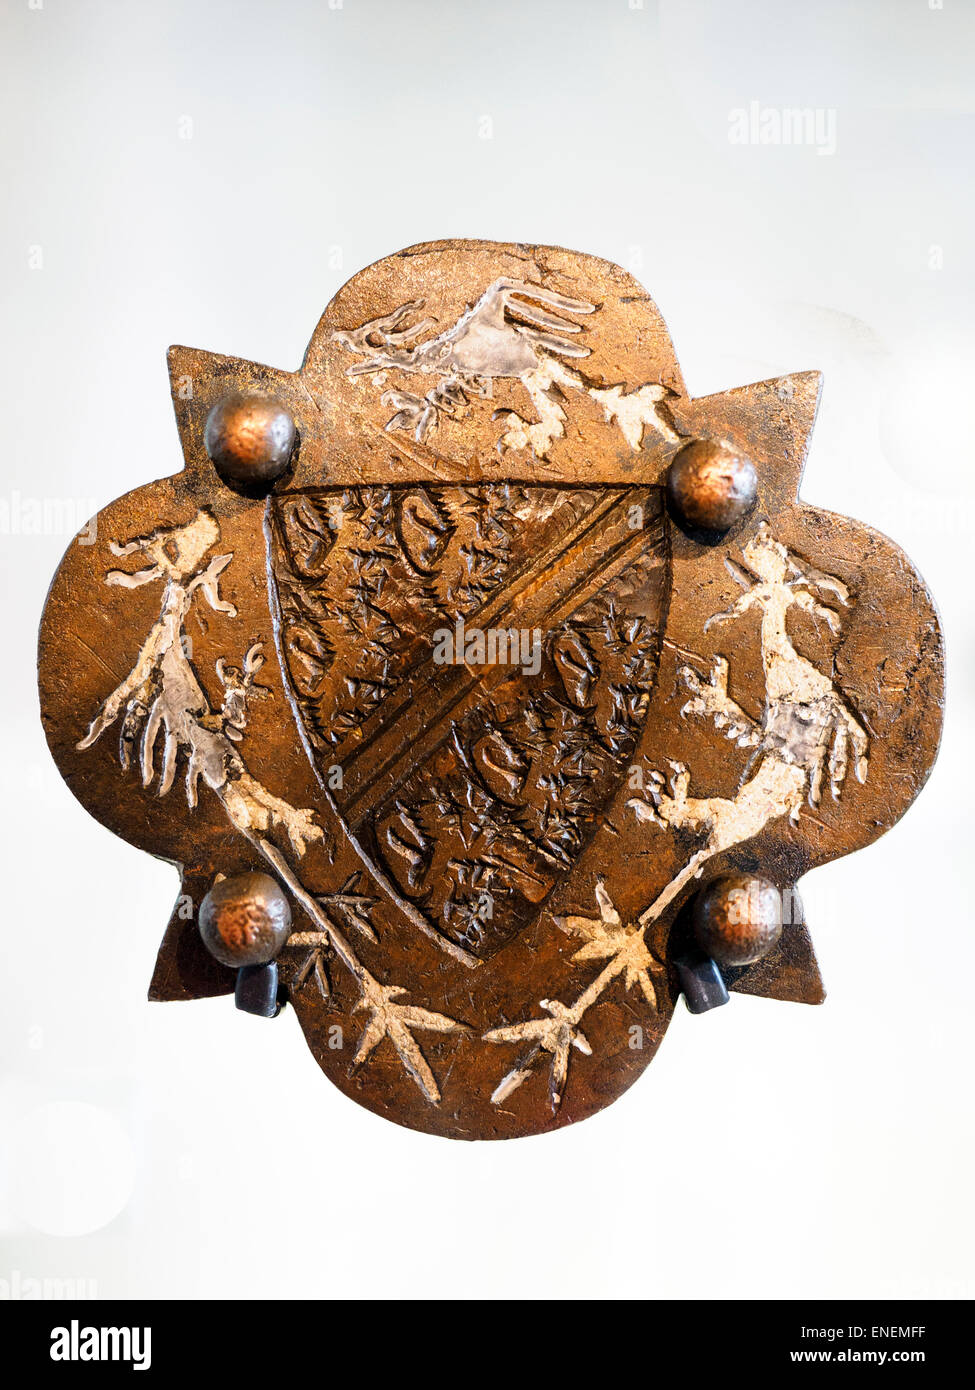 Harness decoration 1300s Horse harness was sometimes decorated with coats of arms. This mount shows the arms of Earls of Hereford, who were hereditary ' constables' of England from 1176 to 1372, responsible of organising tournaments and of matters of chivalry. Museum of London, England Stock Photo